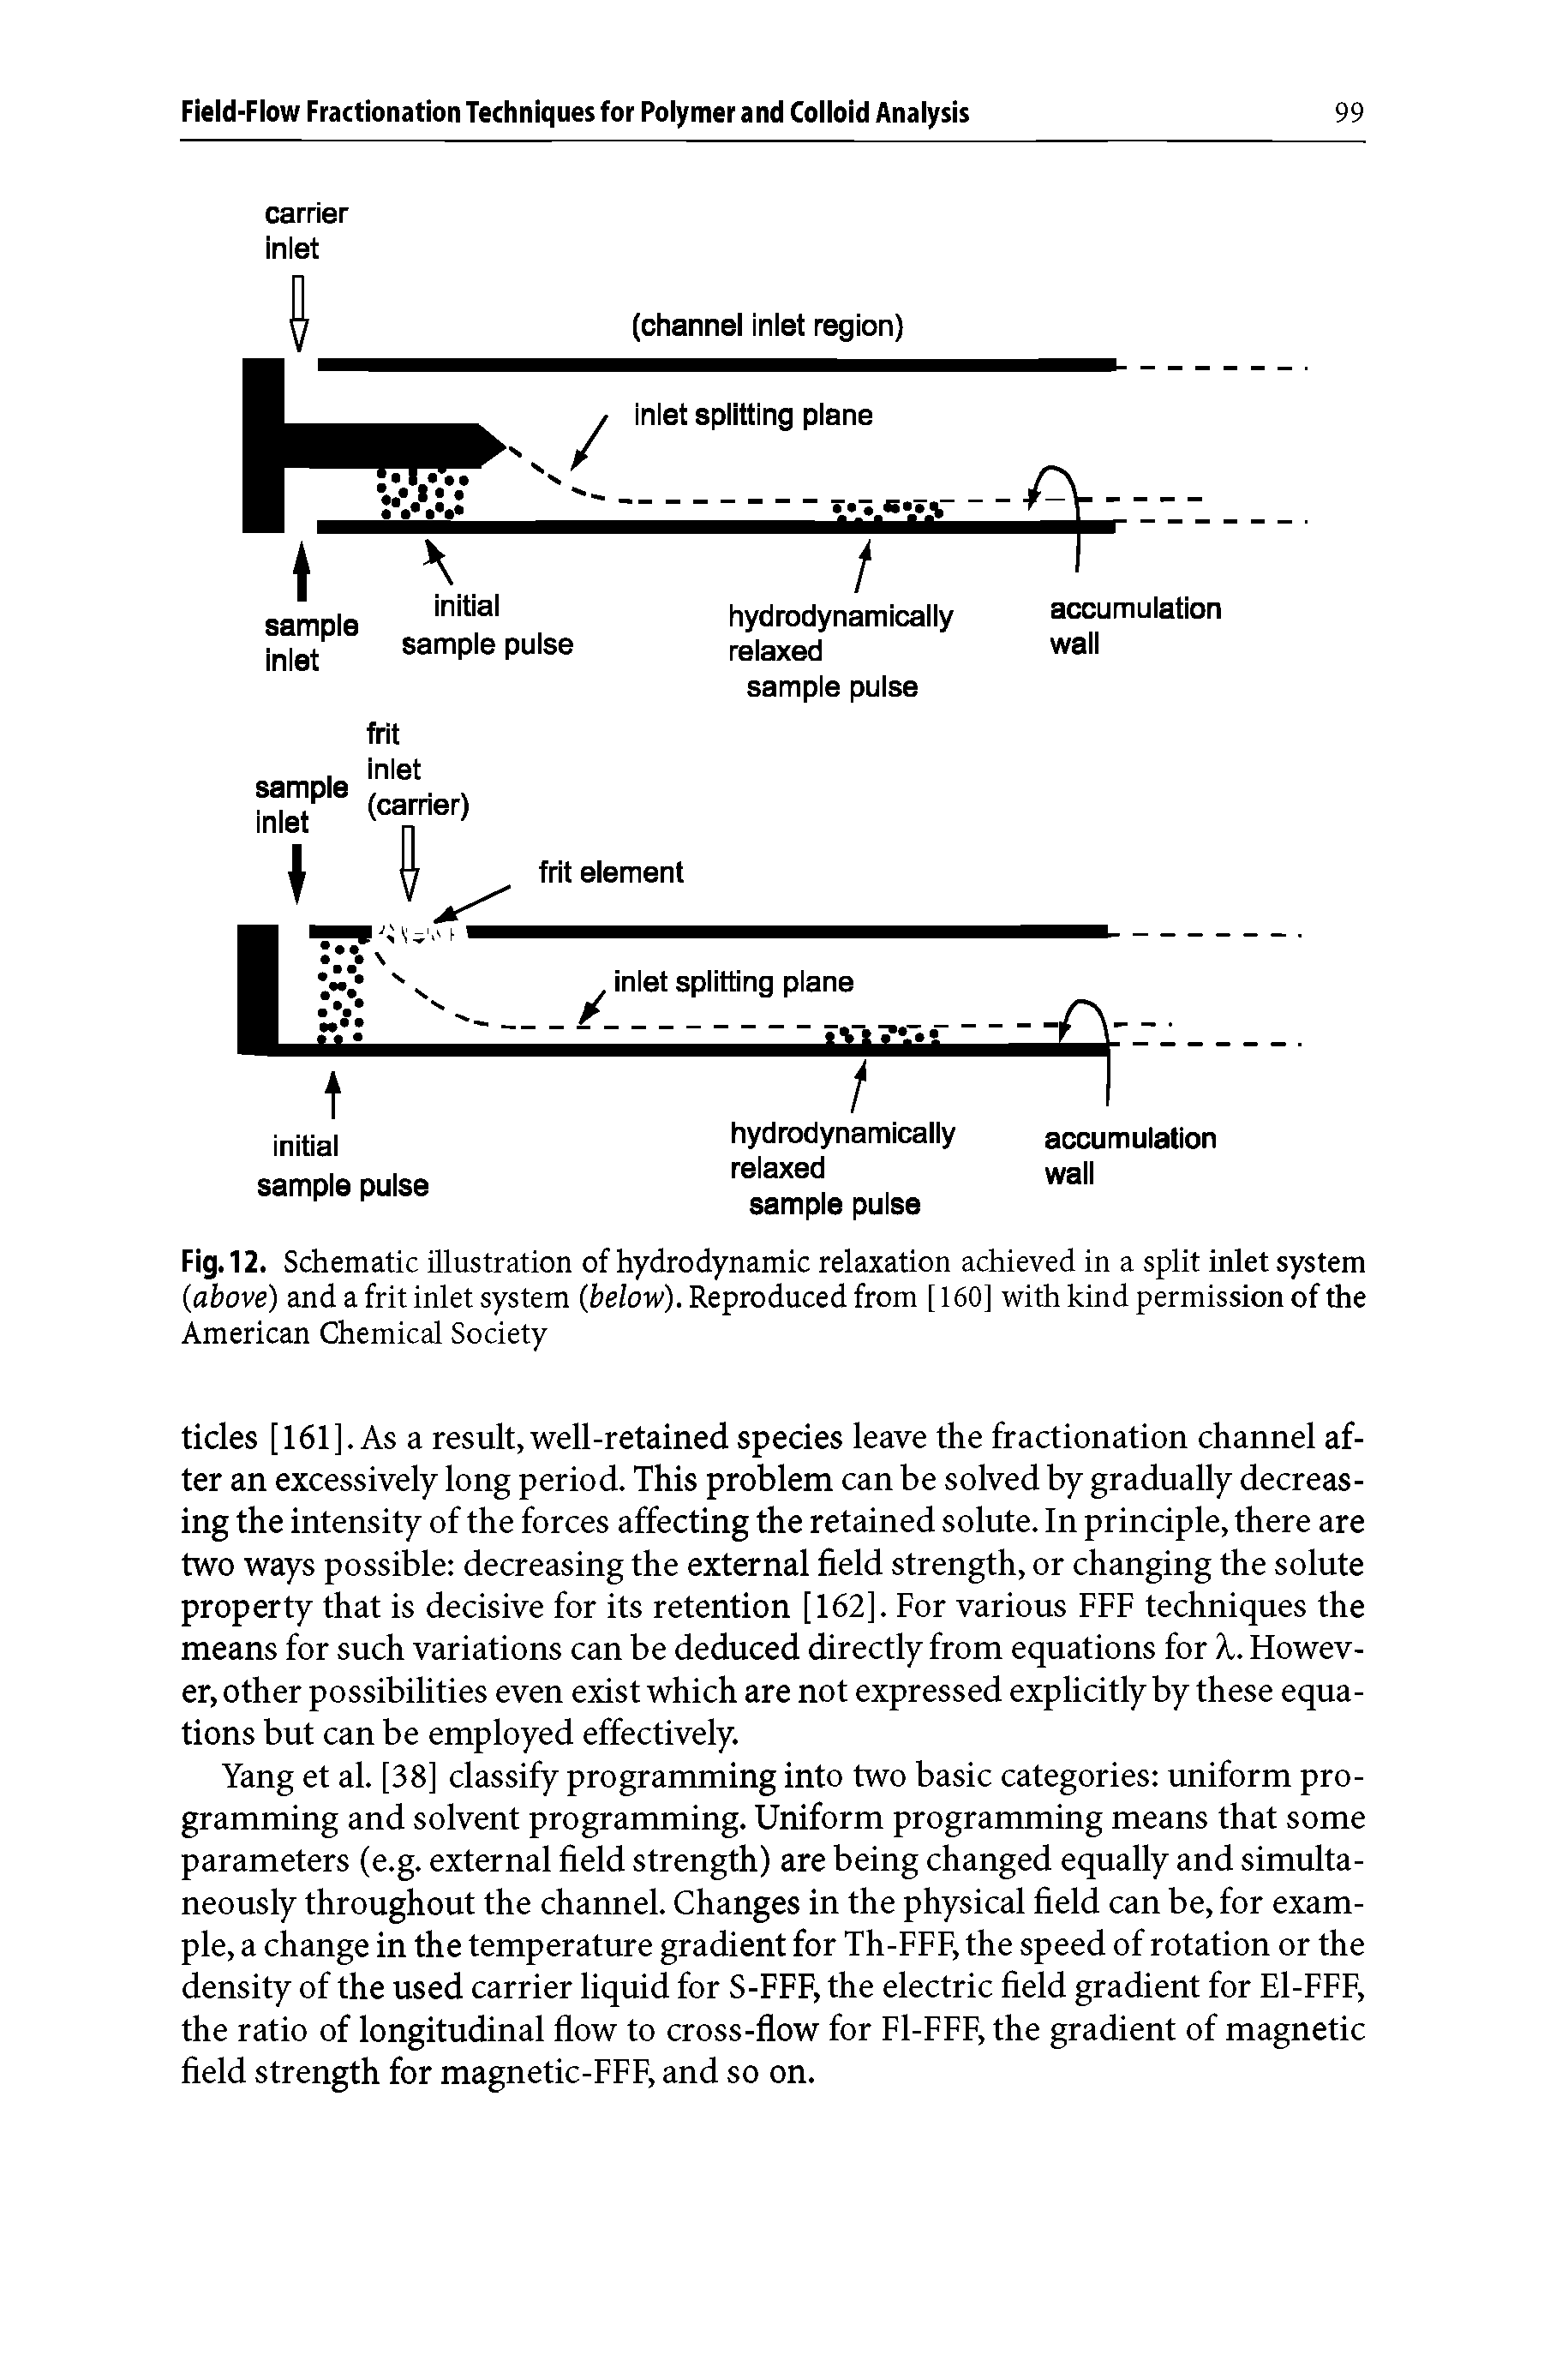 Fig. 12. Schematic illustration of hydrodynamic relaxation achieved in a split inlet system (iabove) and a frit inlet system (below). Reproduced from [160] with kind permission of the American Chemical Society...